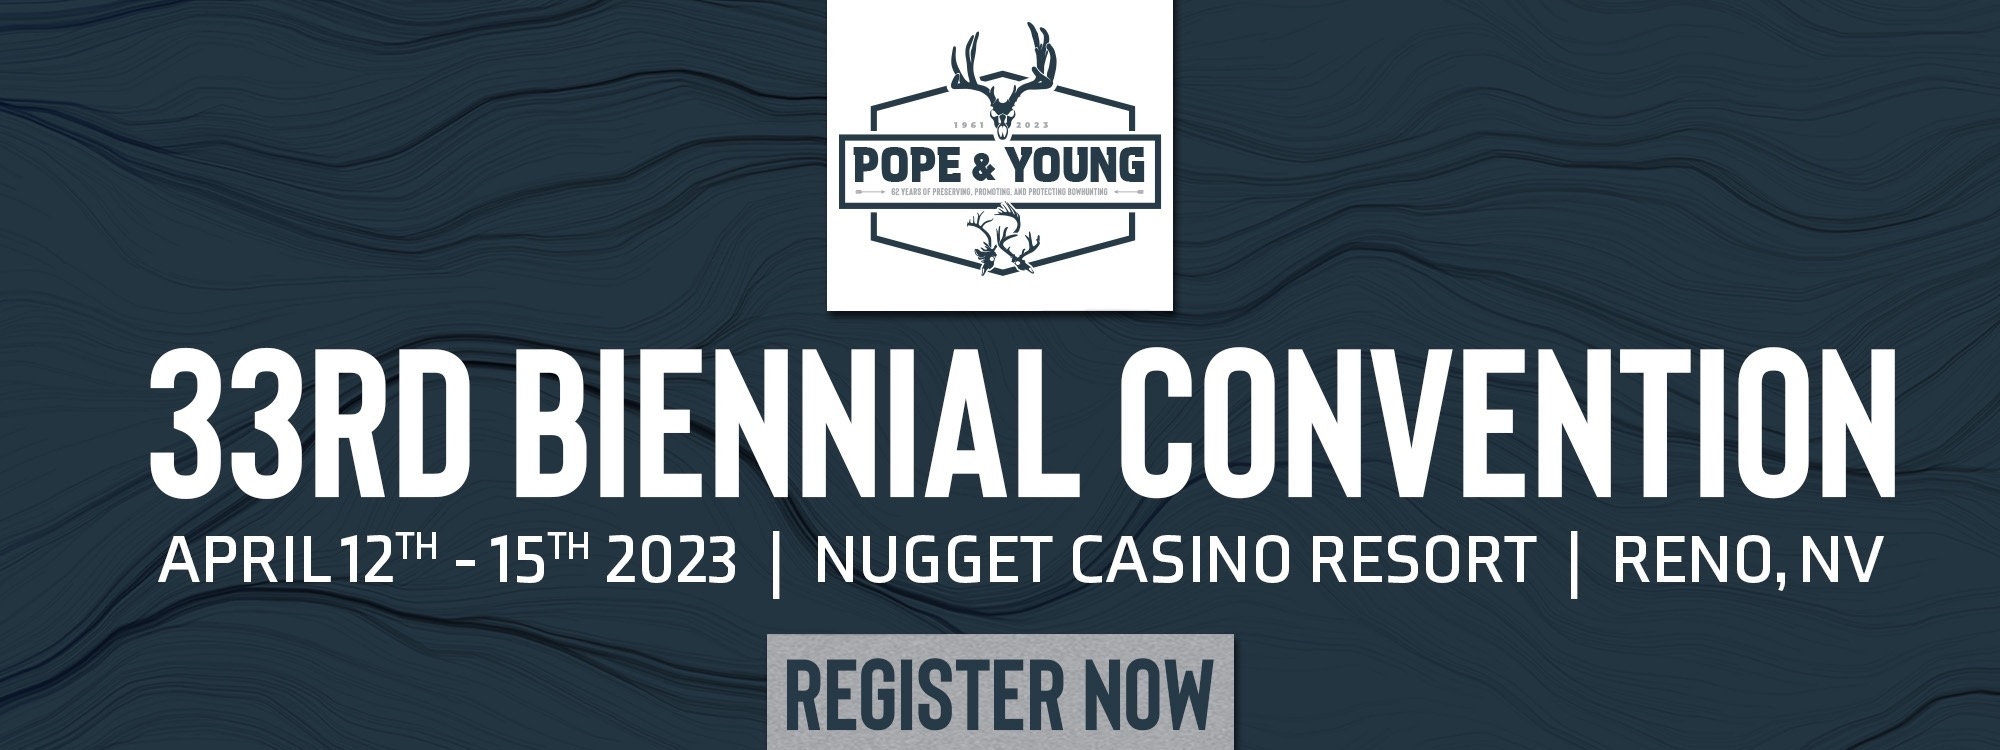 
Join Pope and Young in Reno for Their 33rd Biennial Convention 